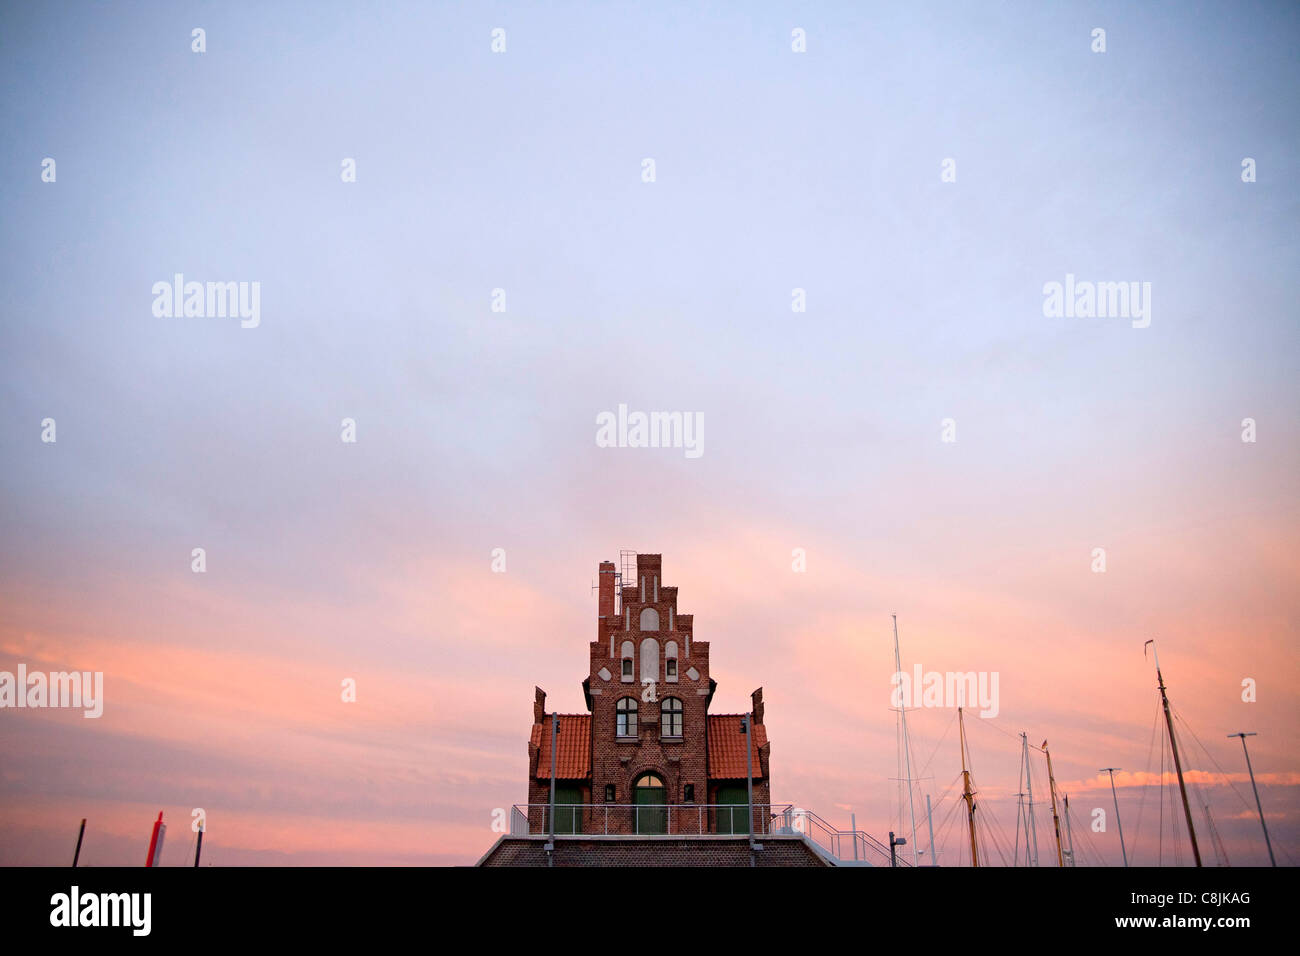 building of the Maritime pilots in the Hanseatic City of Stralsund, Mecklenburg-Vorpommern, Germany Stock Photo